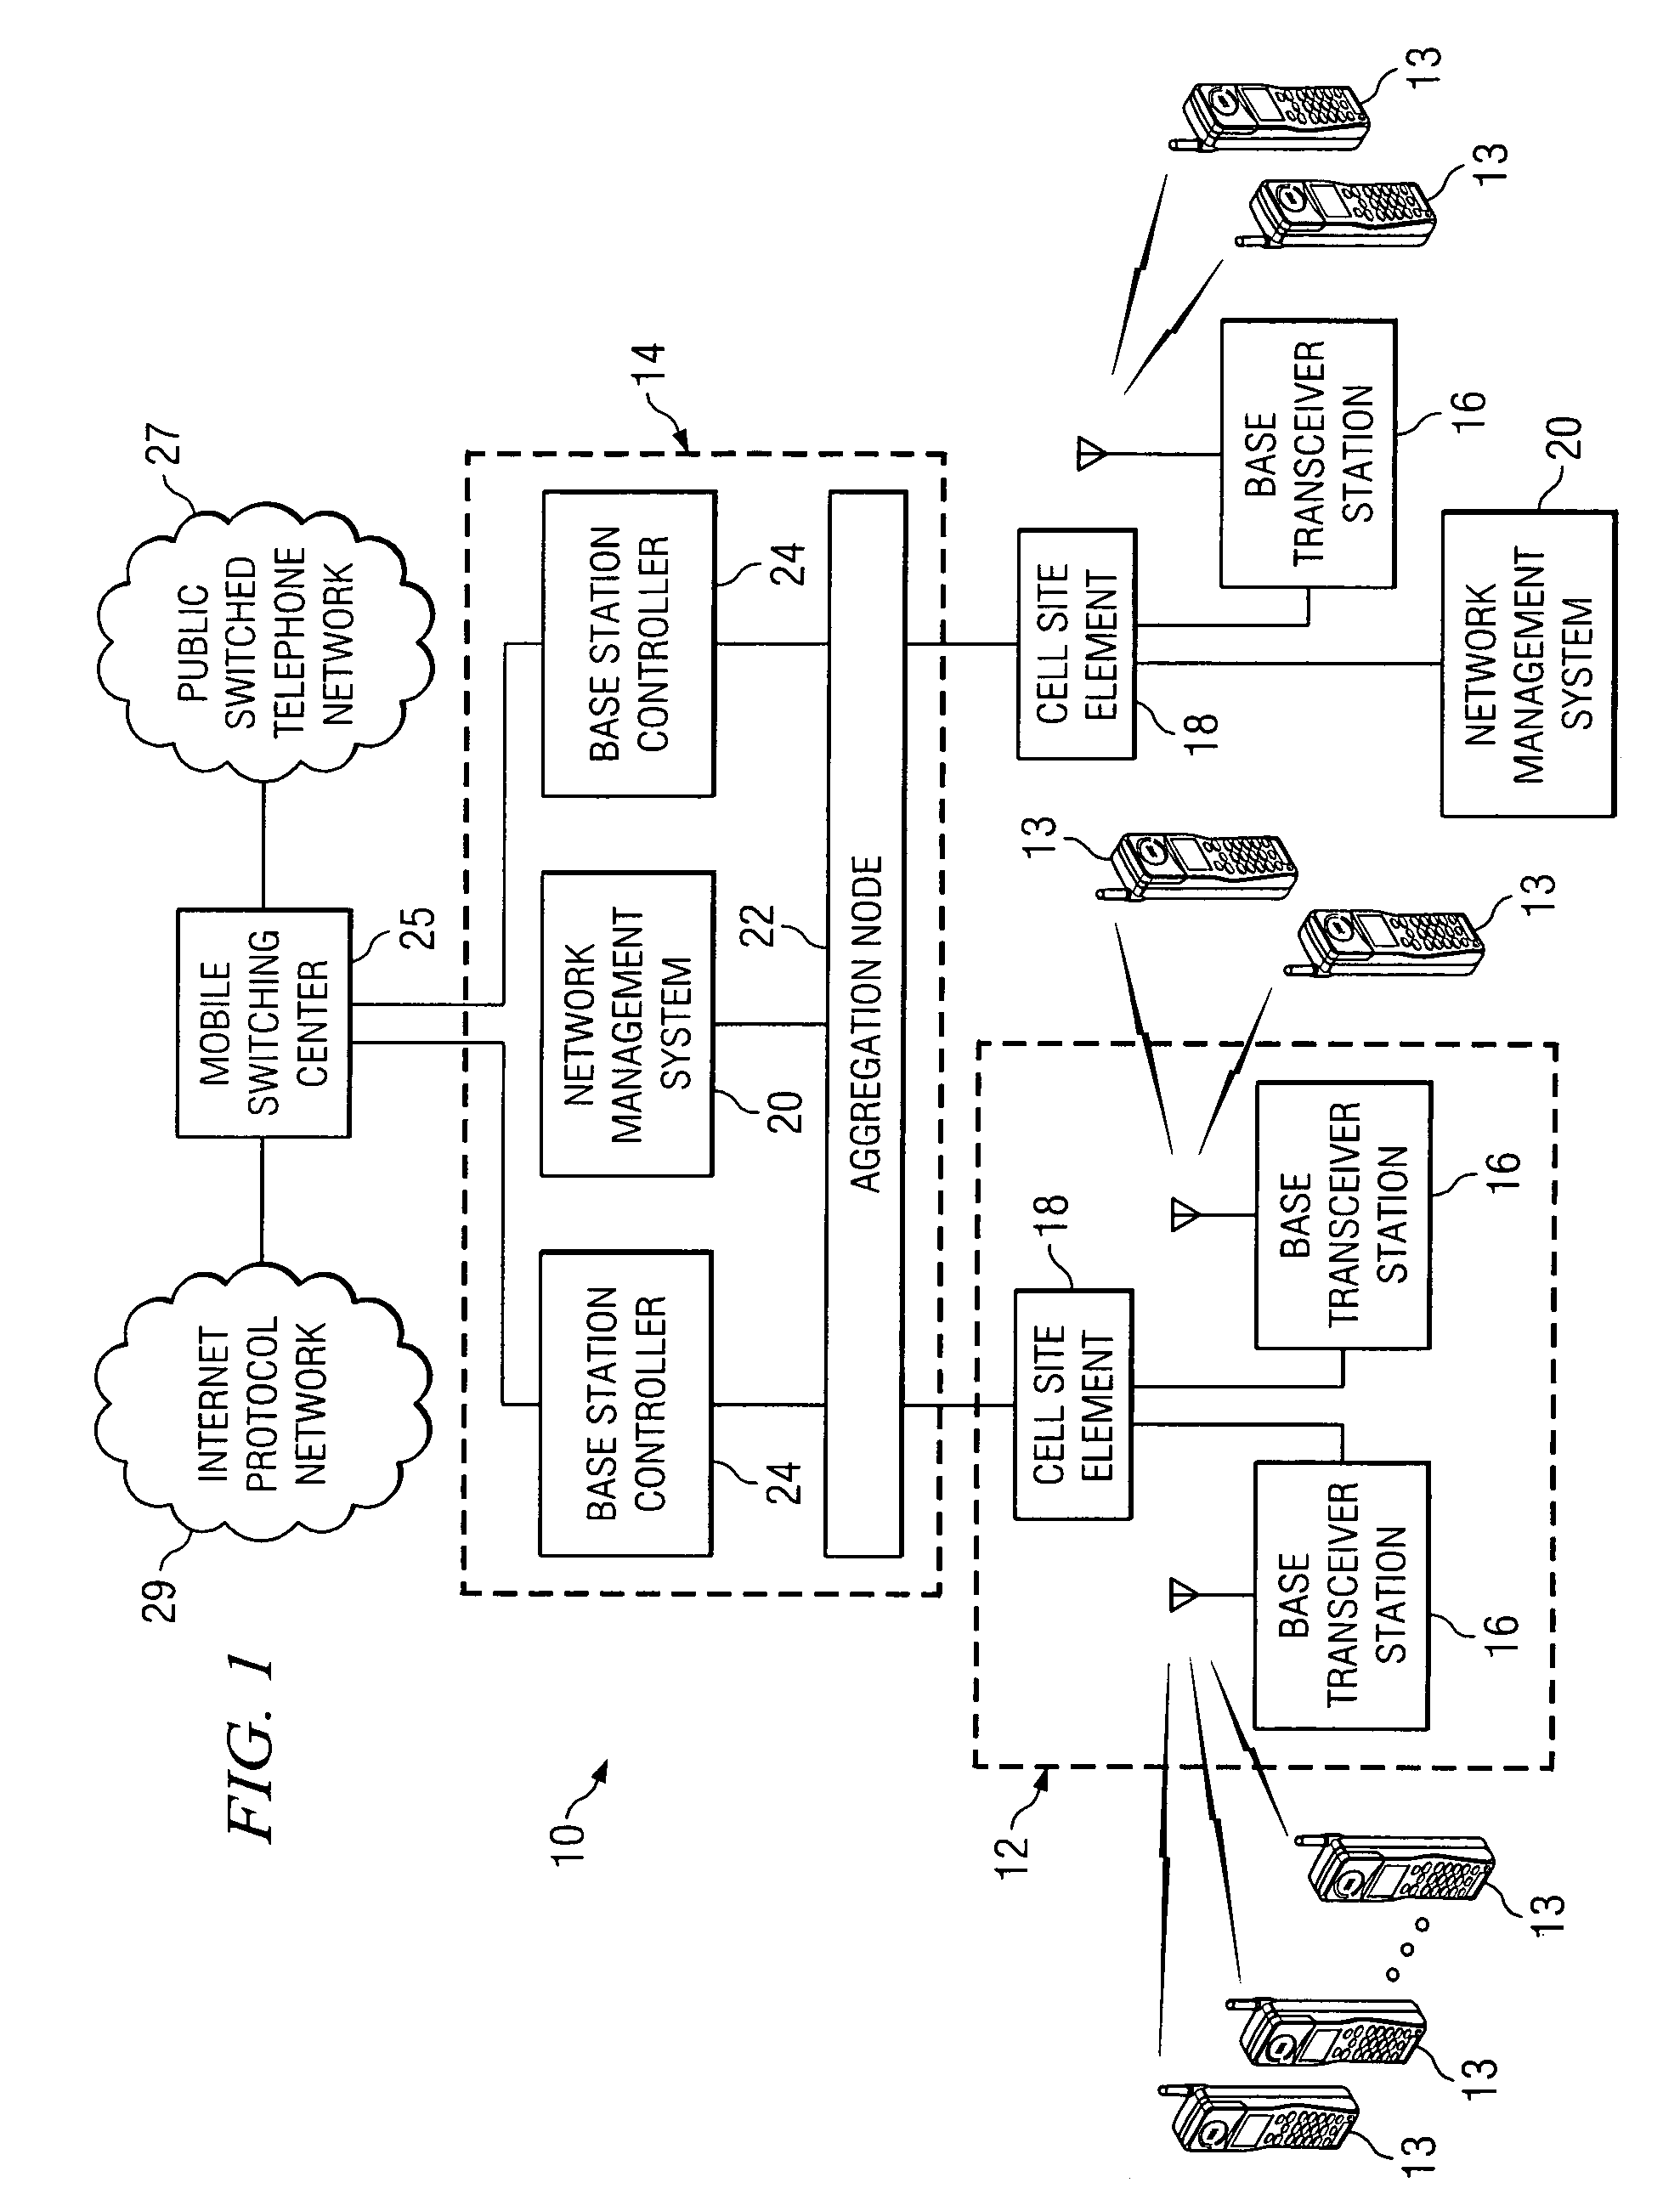 System and method for compressing information in a communications environment